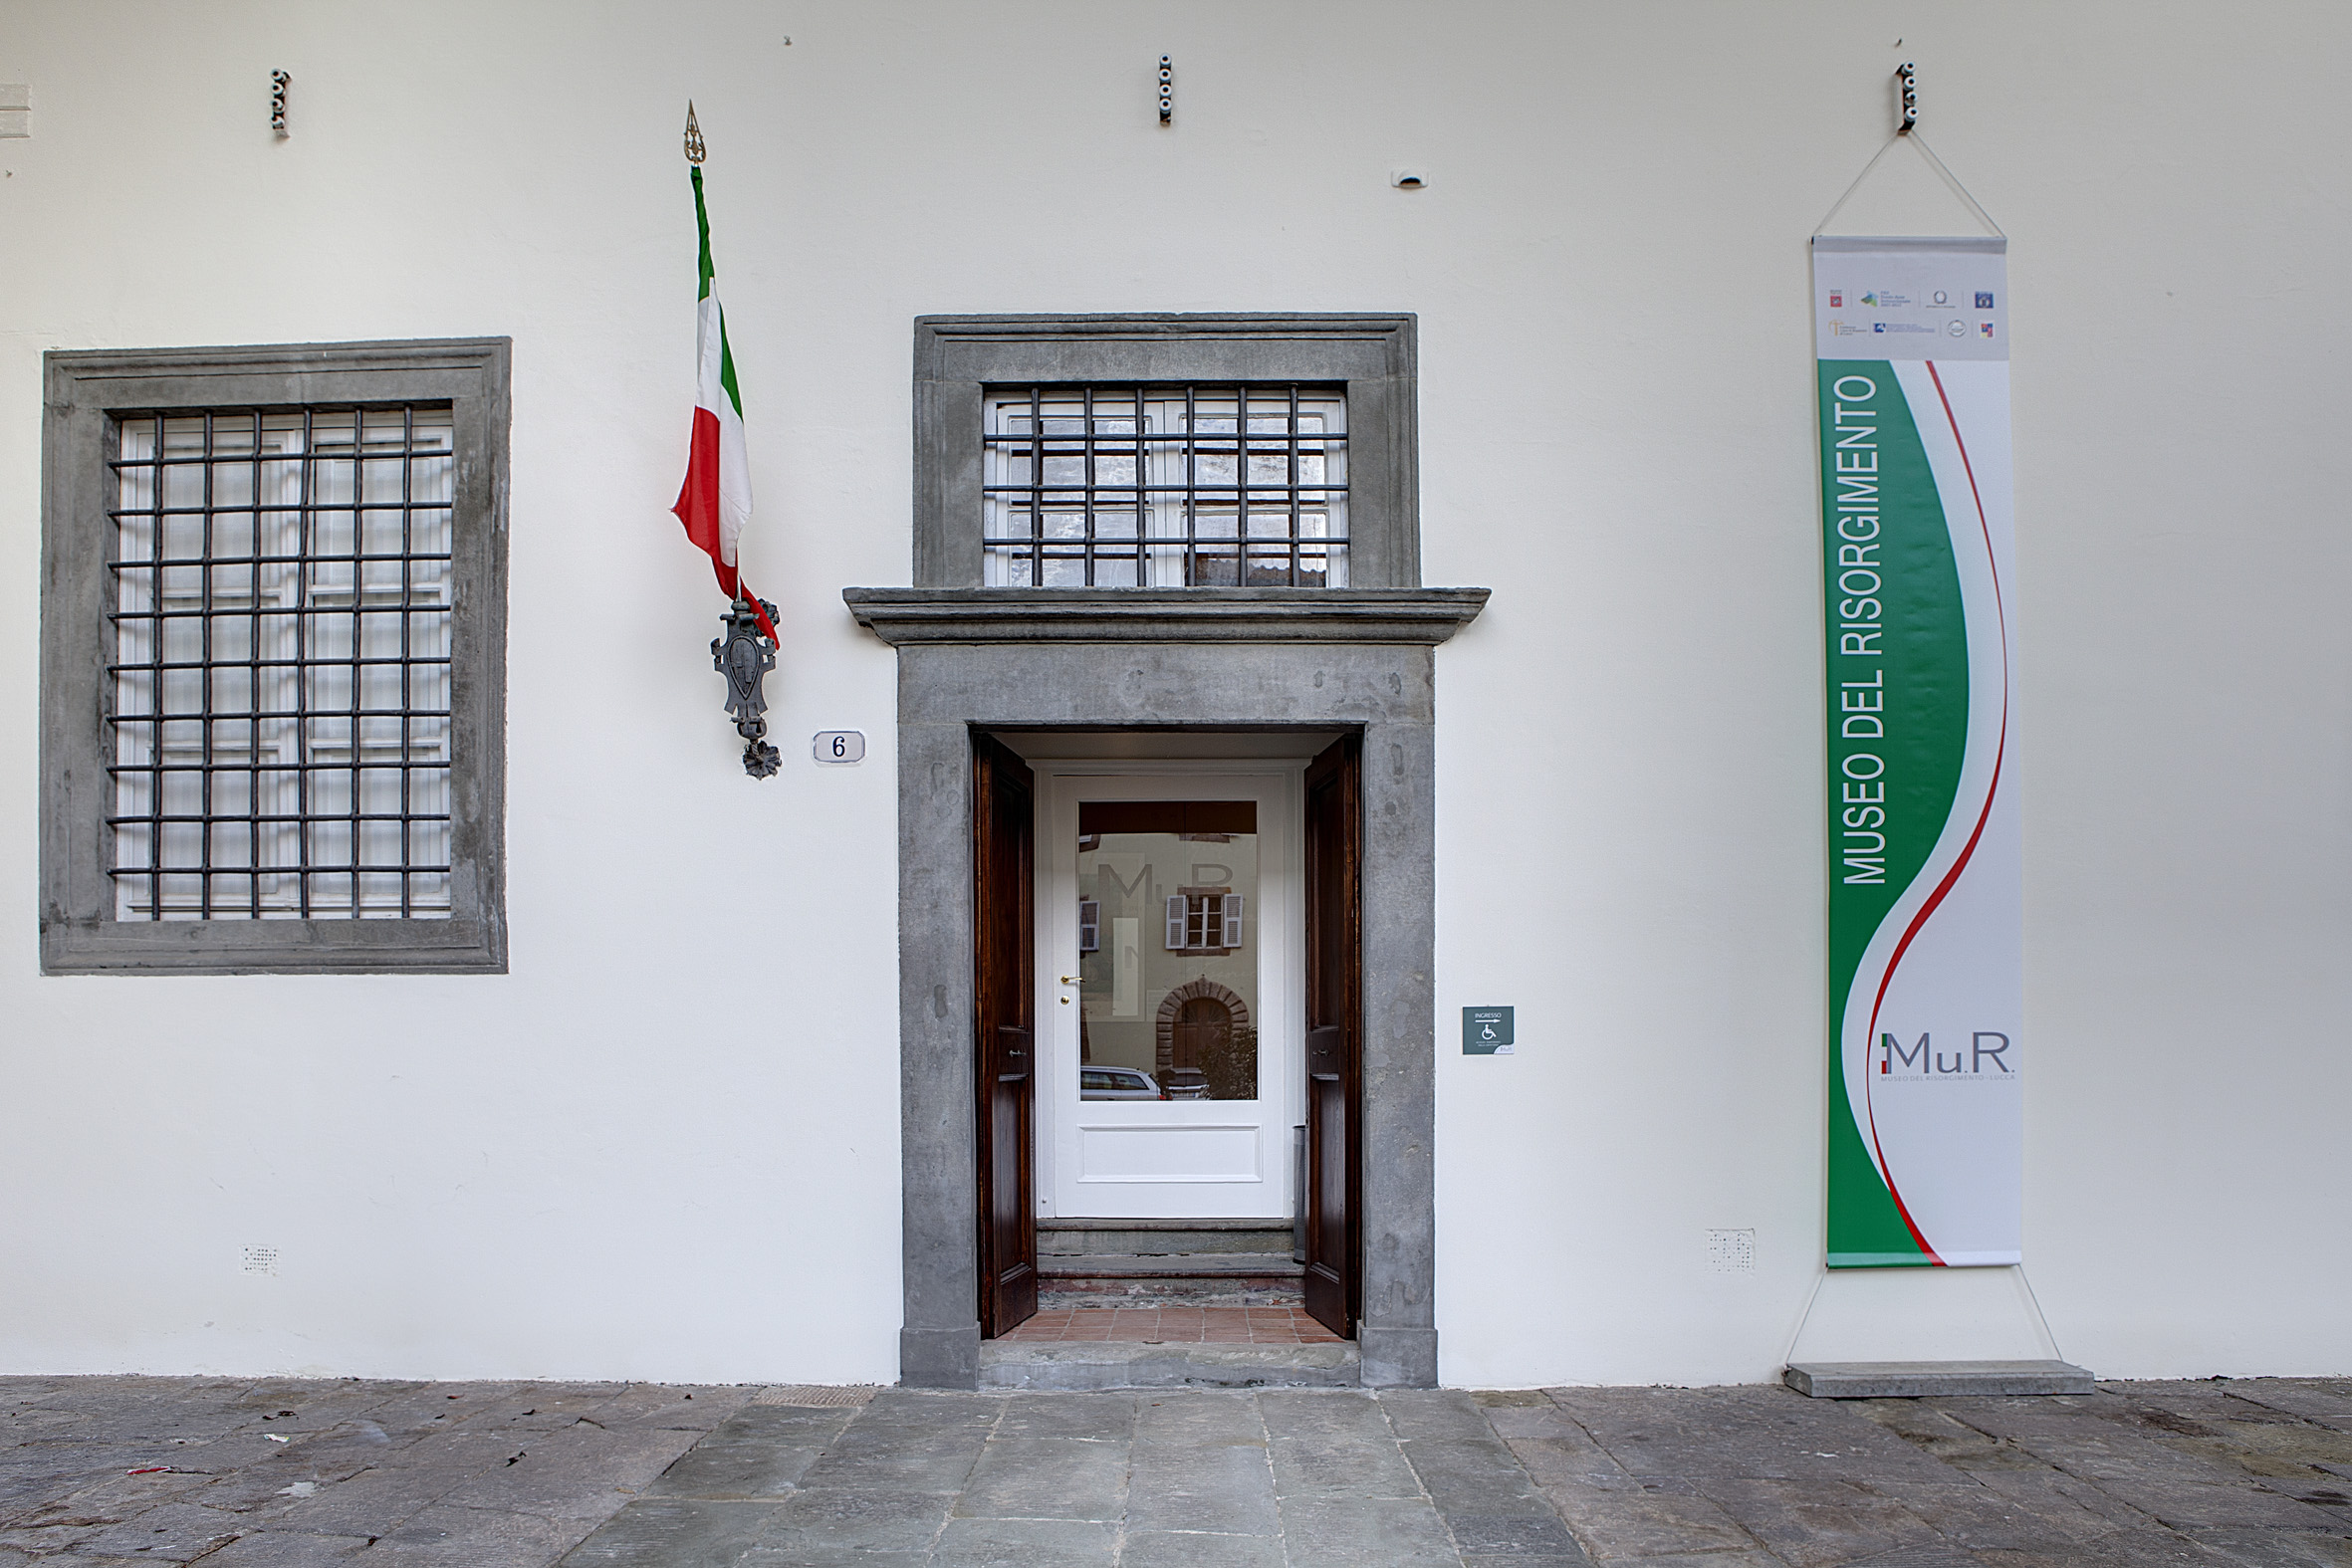 Open in Modal Box http://museodelrisorgimento.lucca.it/wp-content/uploads/2014/09/MUR-LUCCA-28.jpg